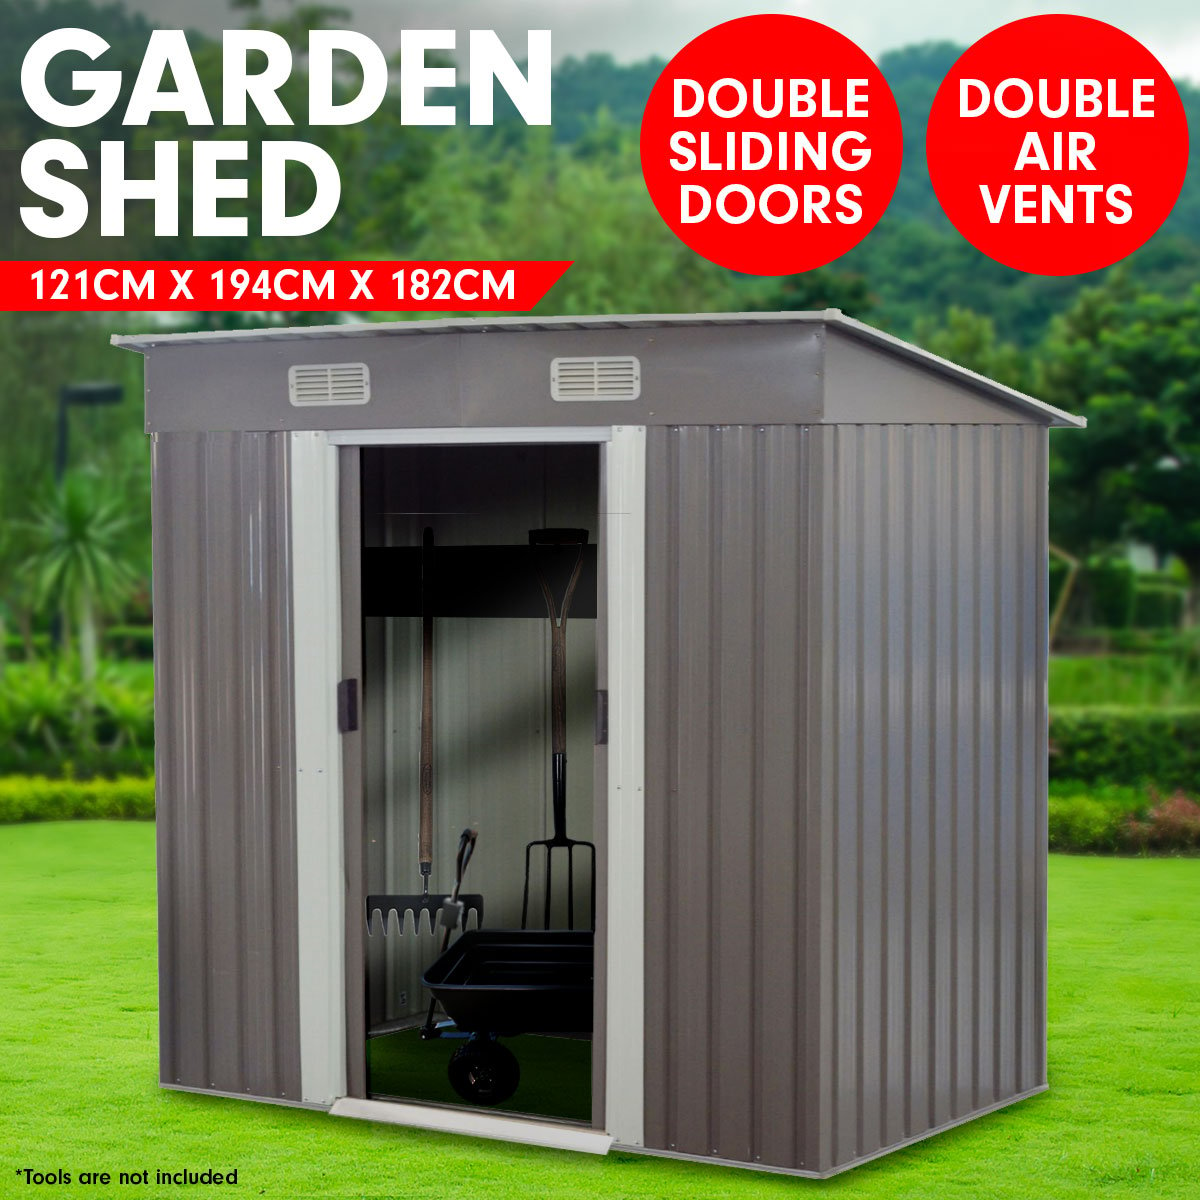 Garden Shed Flat 4ft x 6ft Outdoor Storage Shelter - Grey 1